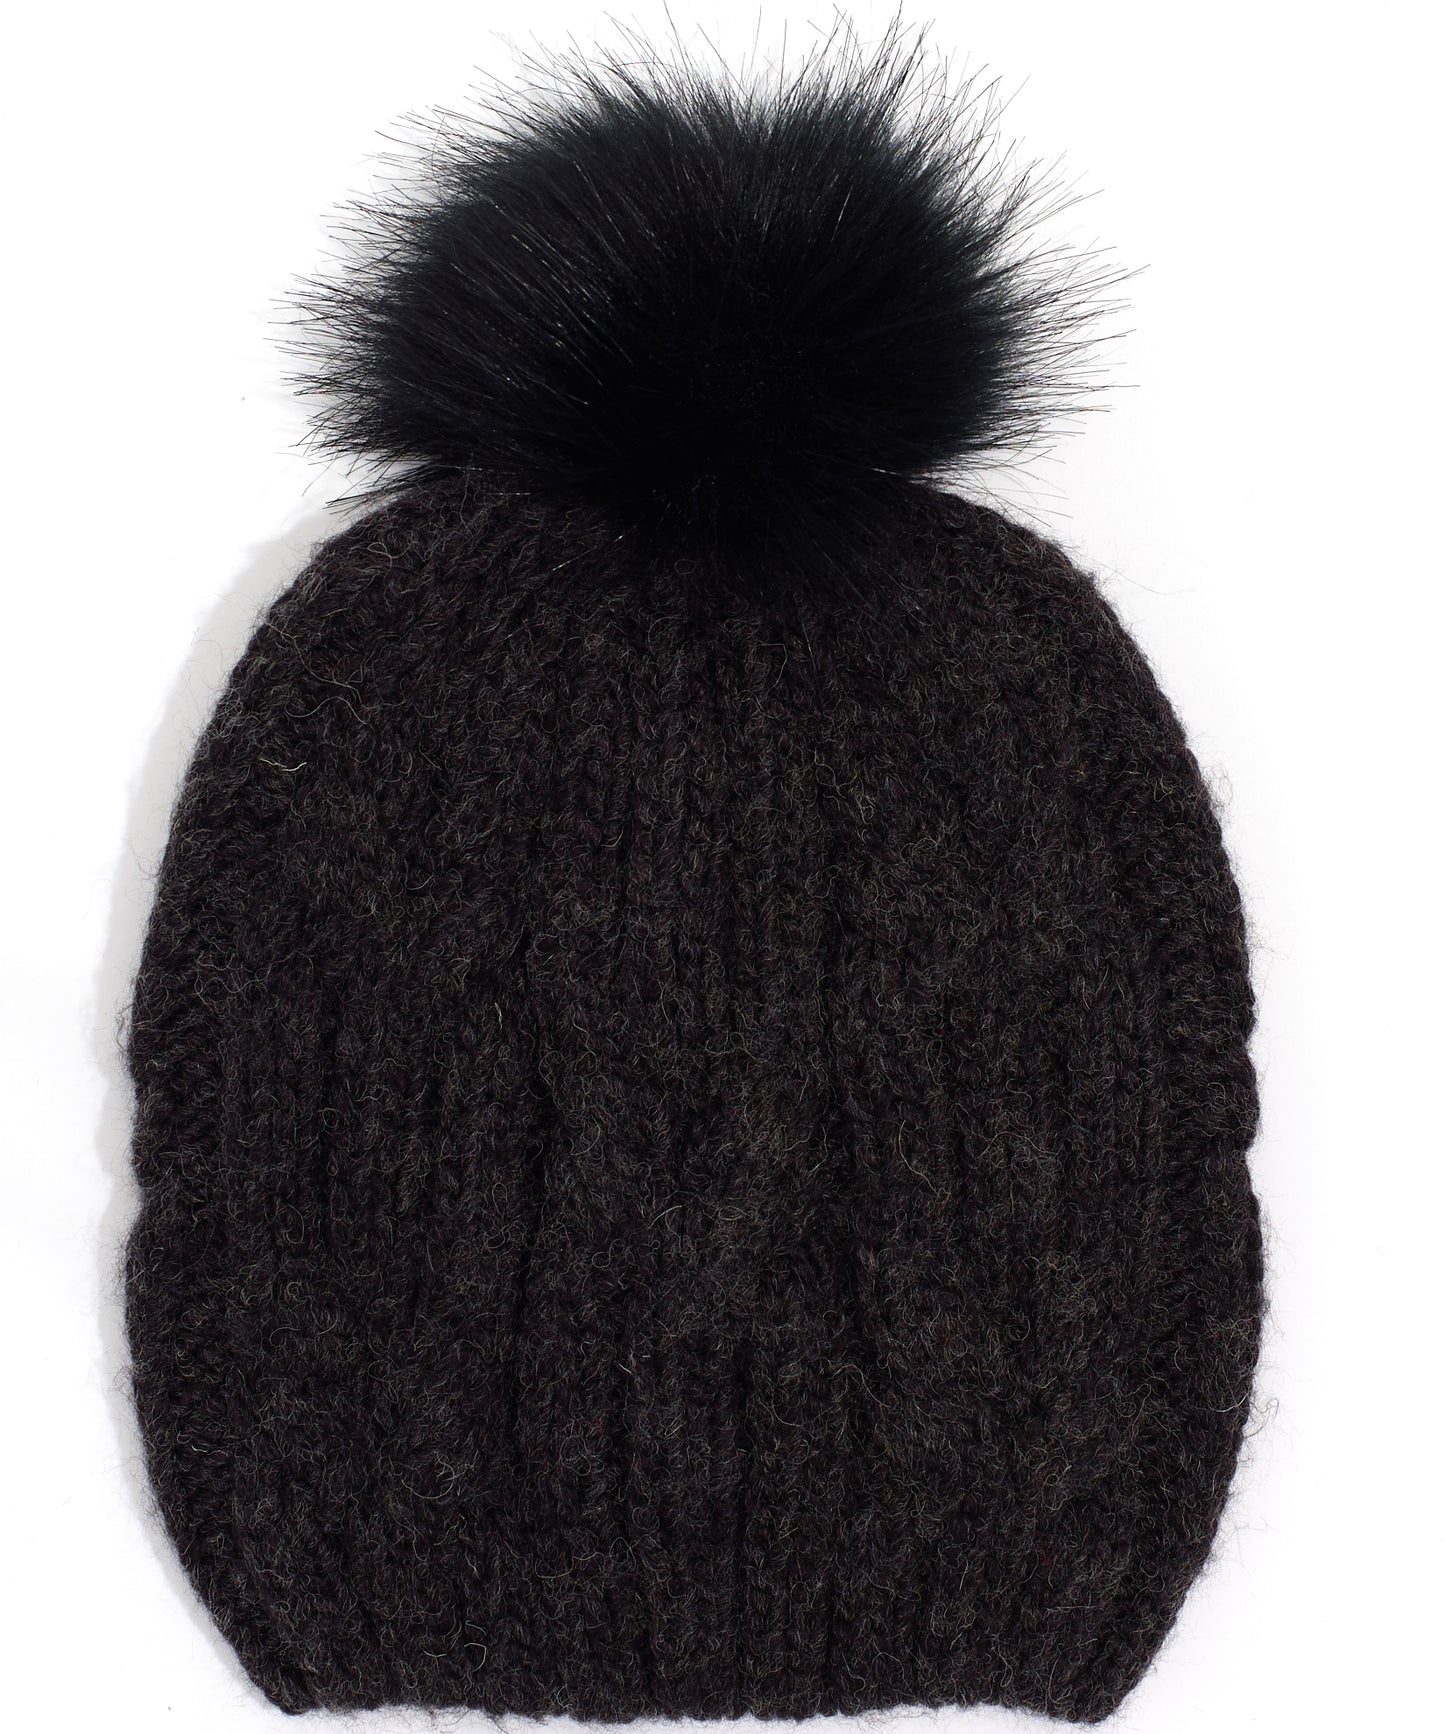 Twisted Cable Pom Hat in color Charcoal